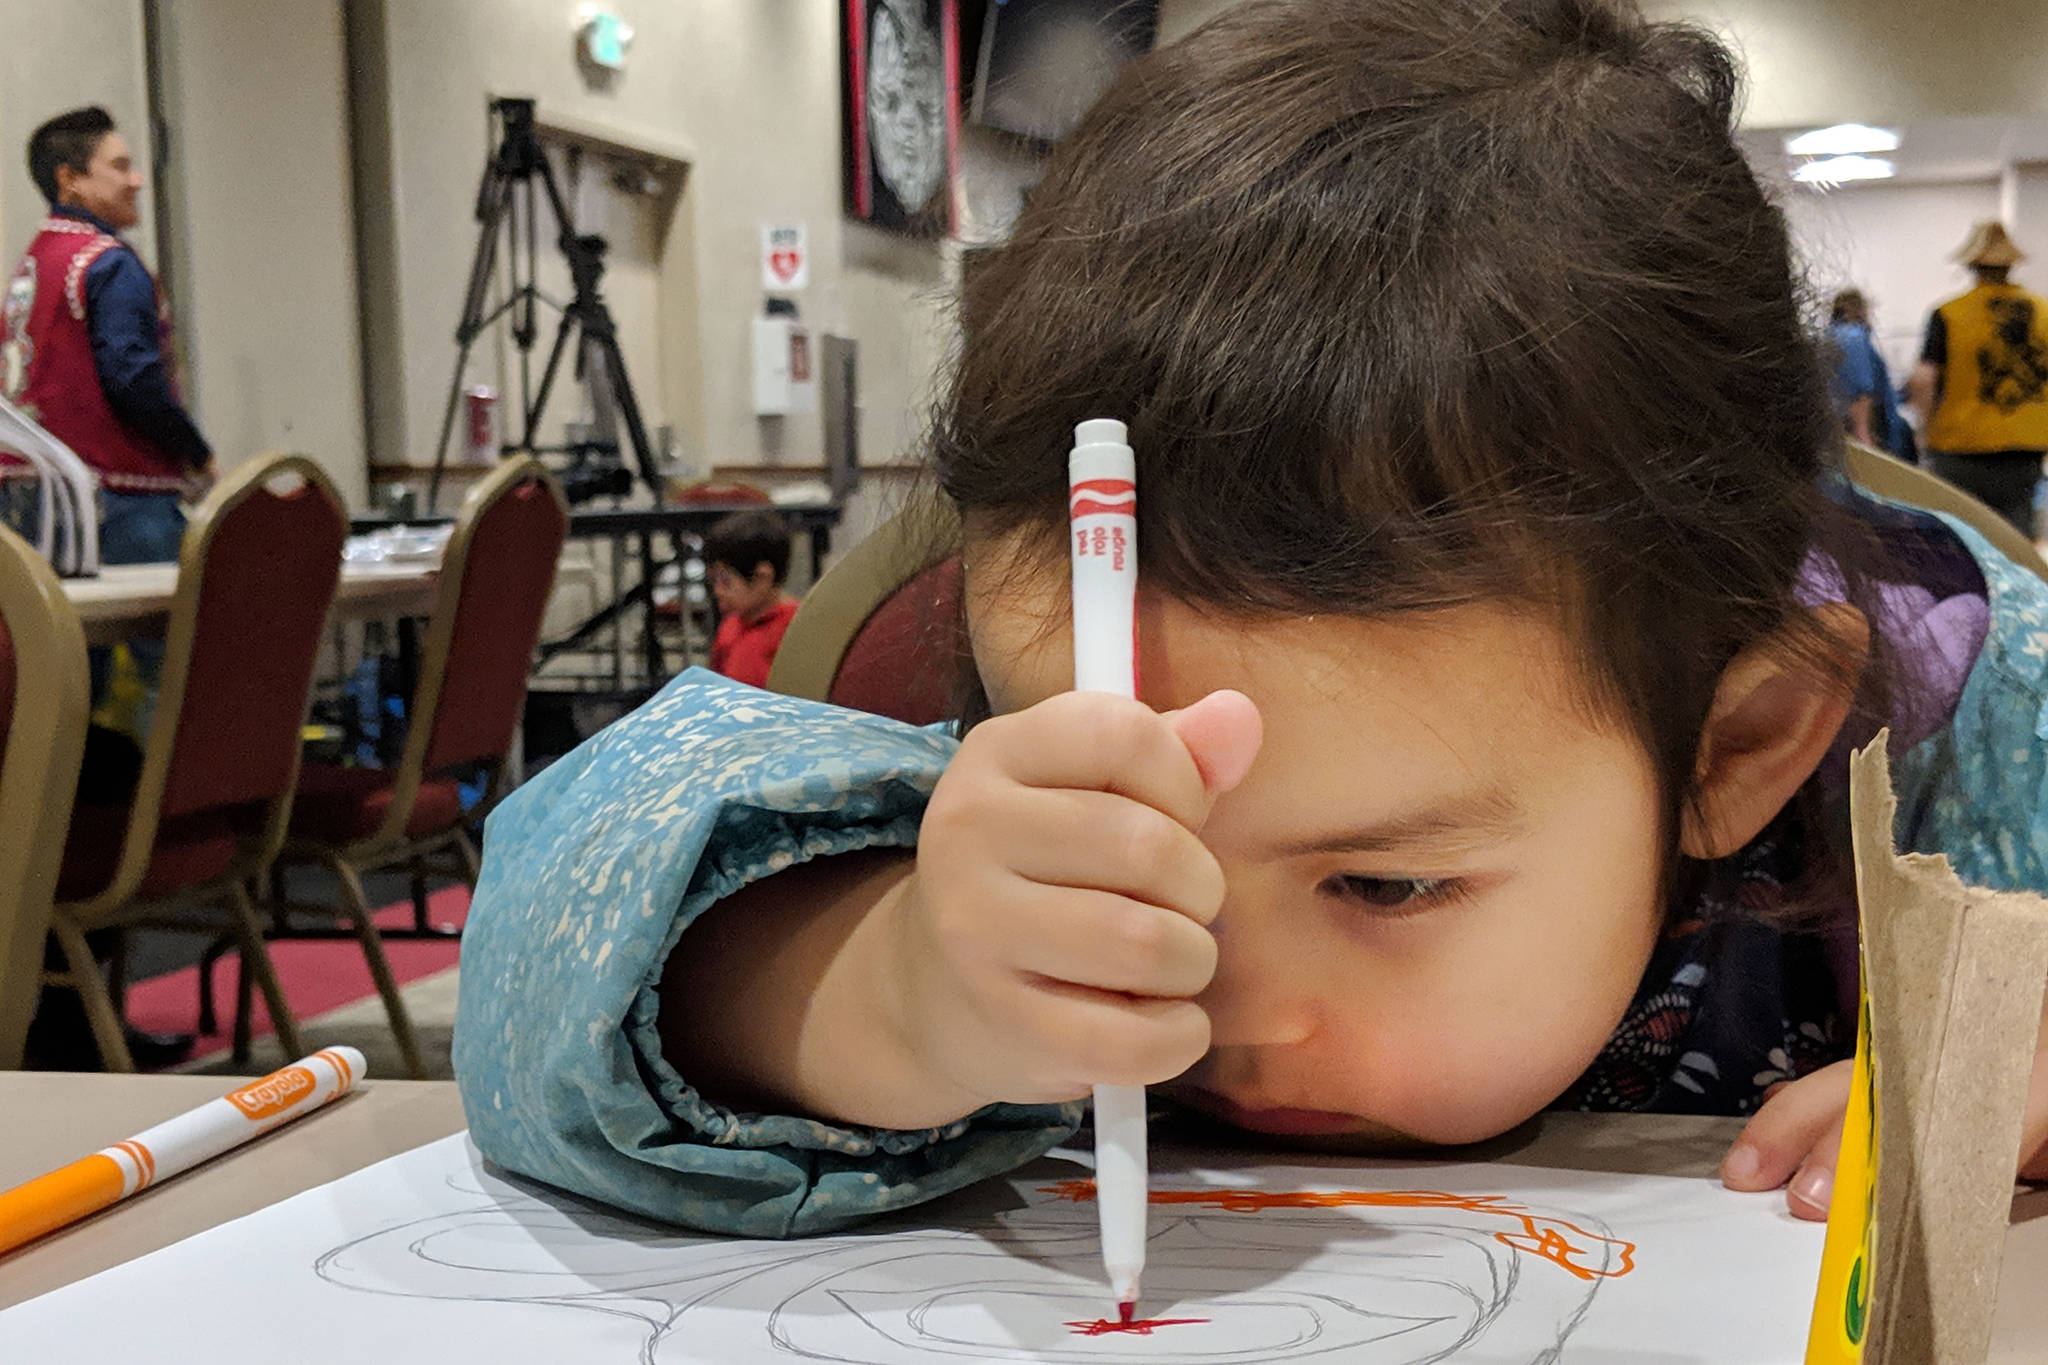 Mary Hope, 4, colors in a formalize drawing by master artist Ryan Abel during Rock Your Mocs, a celebration of Alaska Native culture organized by Goldbelt Heritage Foundation. (Ben Hohenstatt | Capital City Weekly)